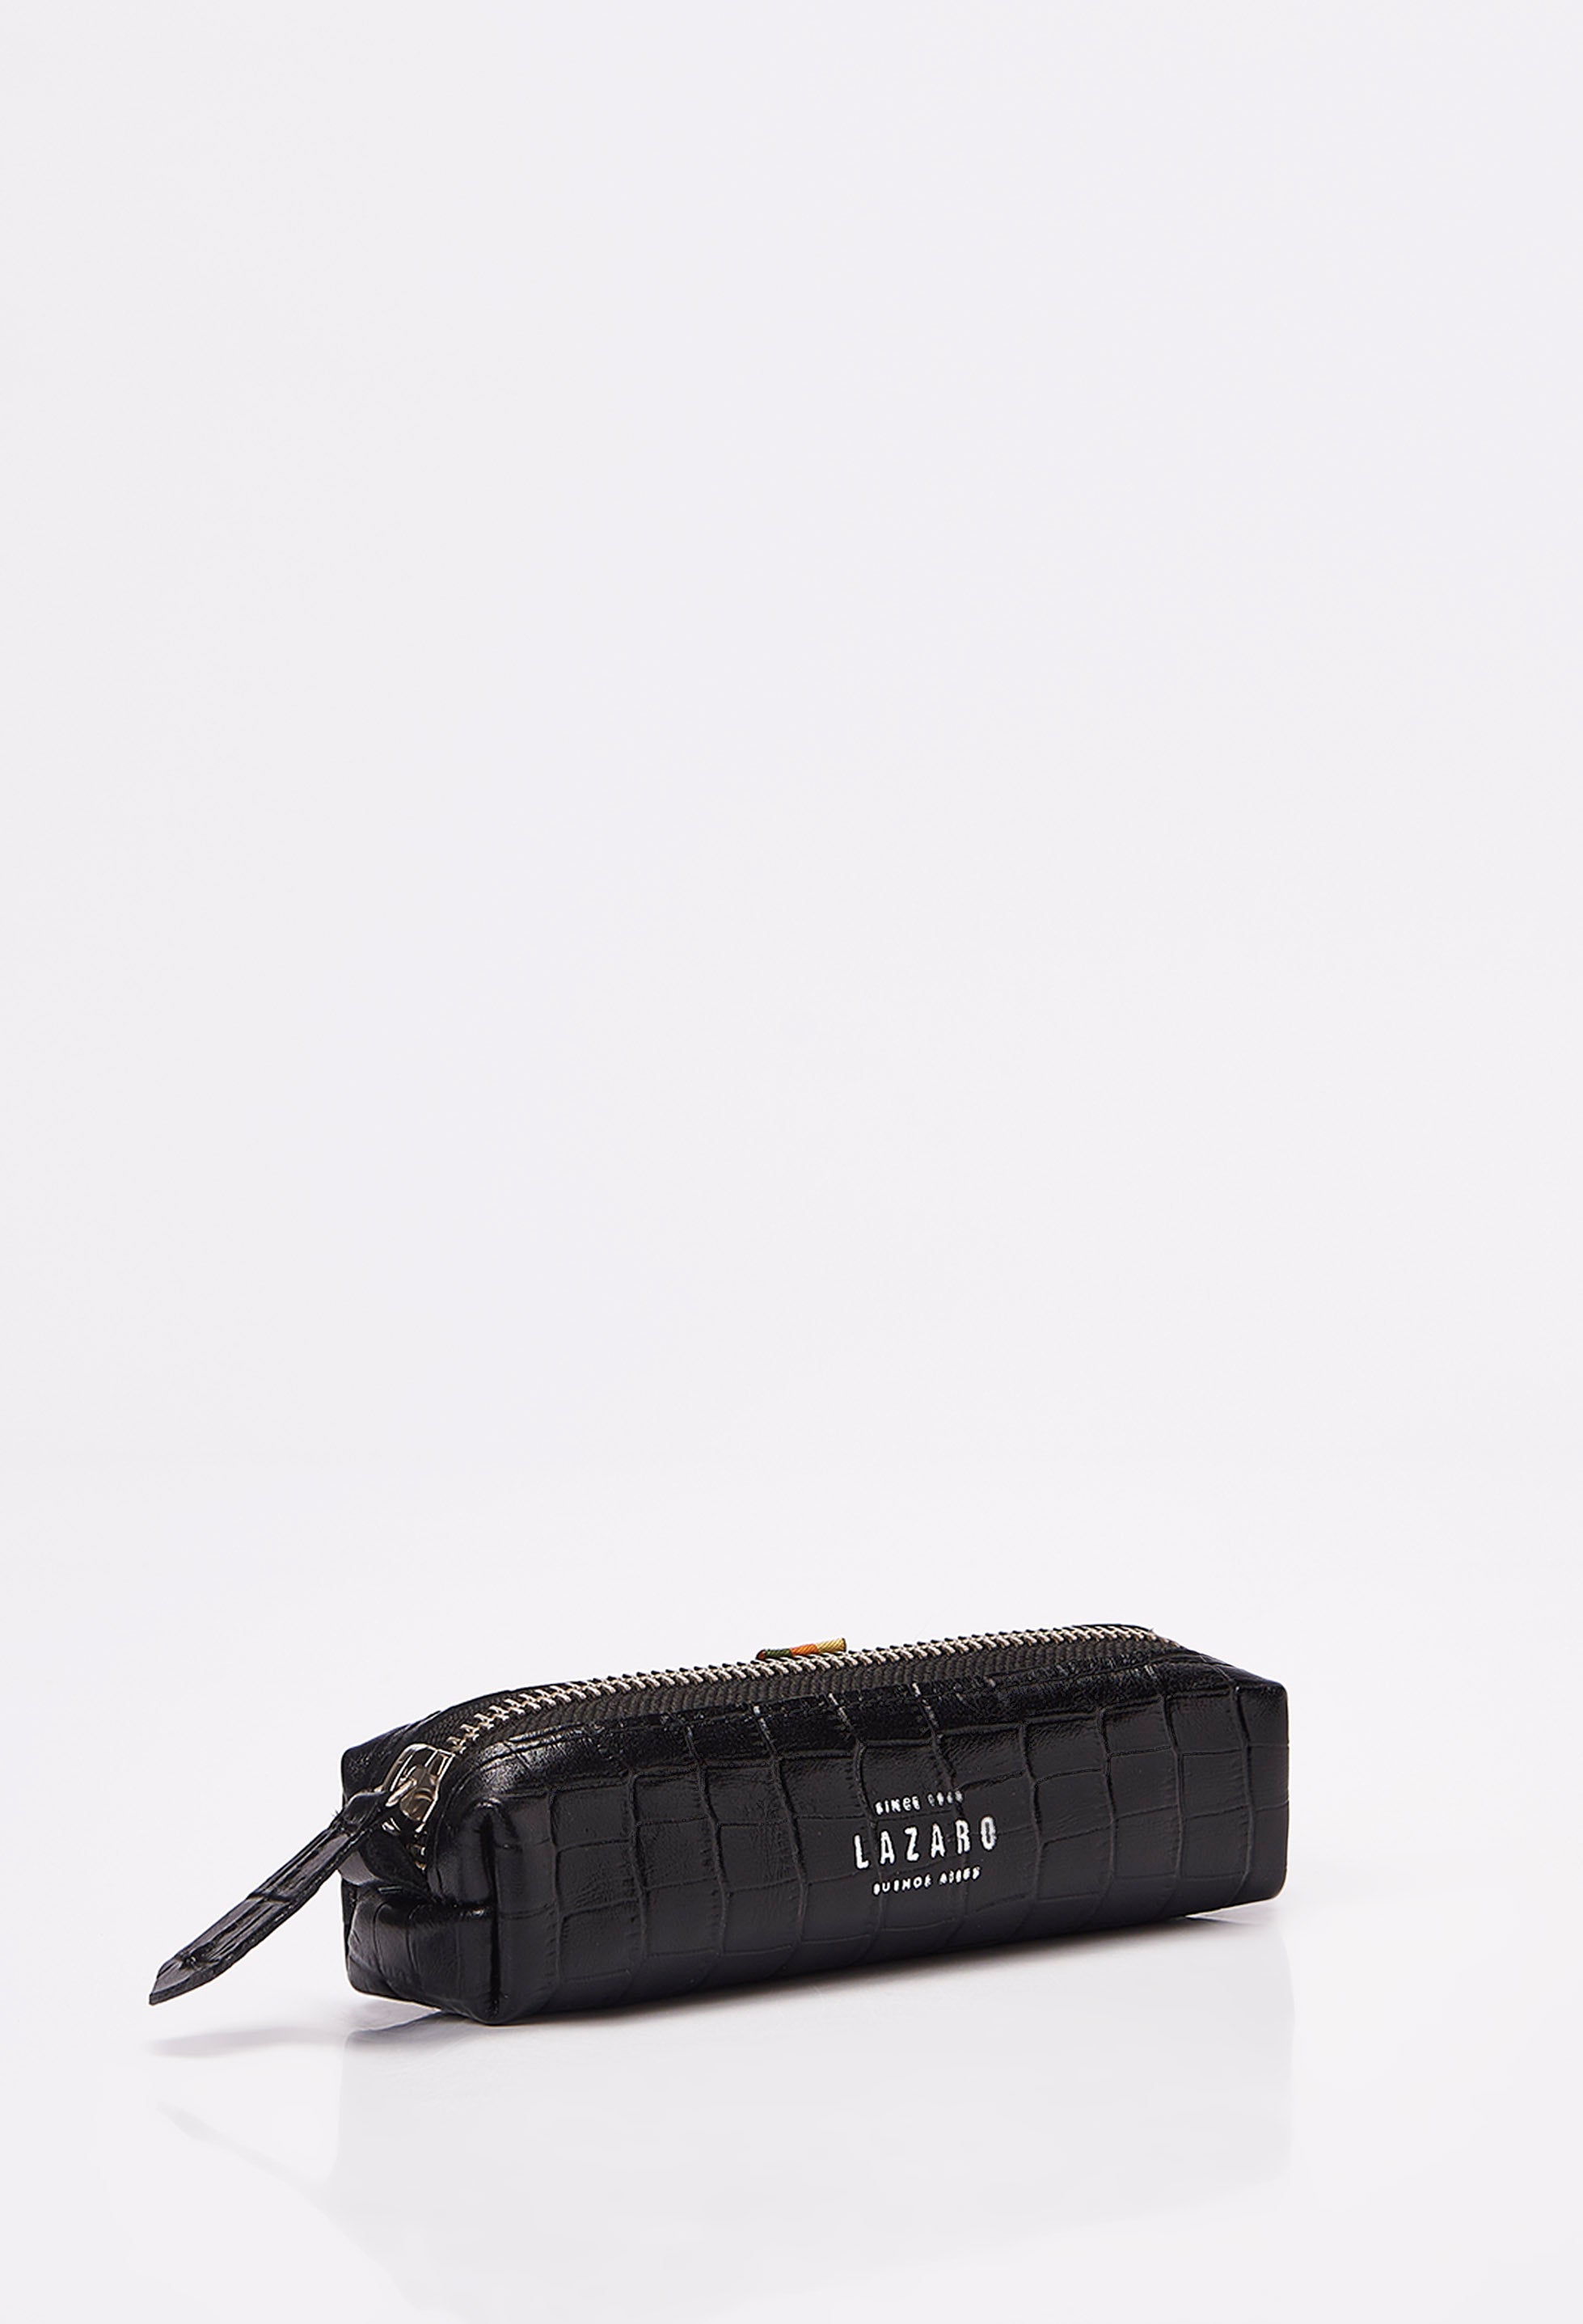 Side of a Black Croco Leather Pencil Case with Lazaro embossed logo.